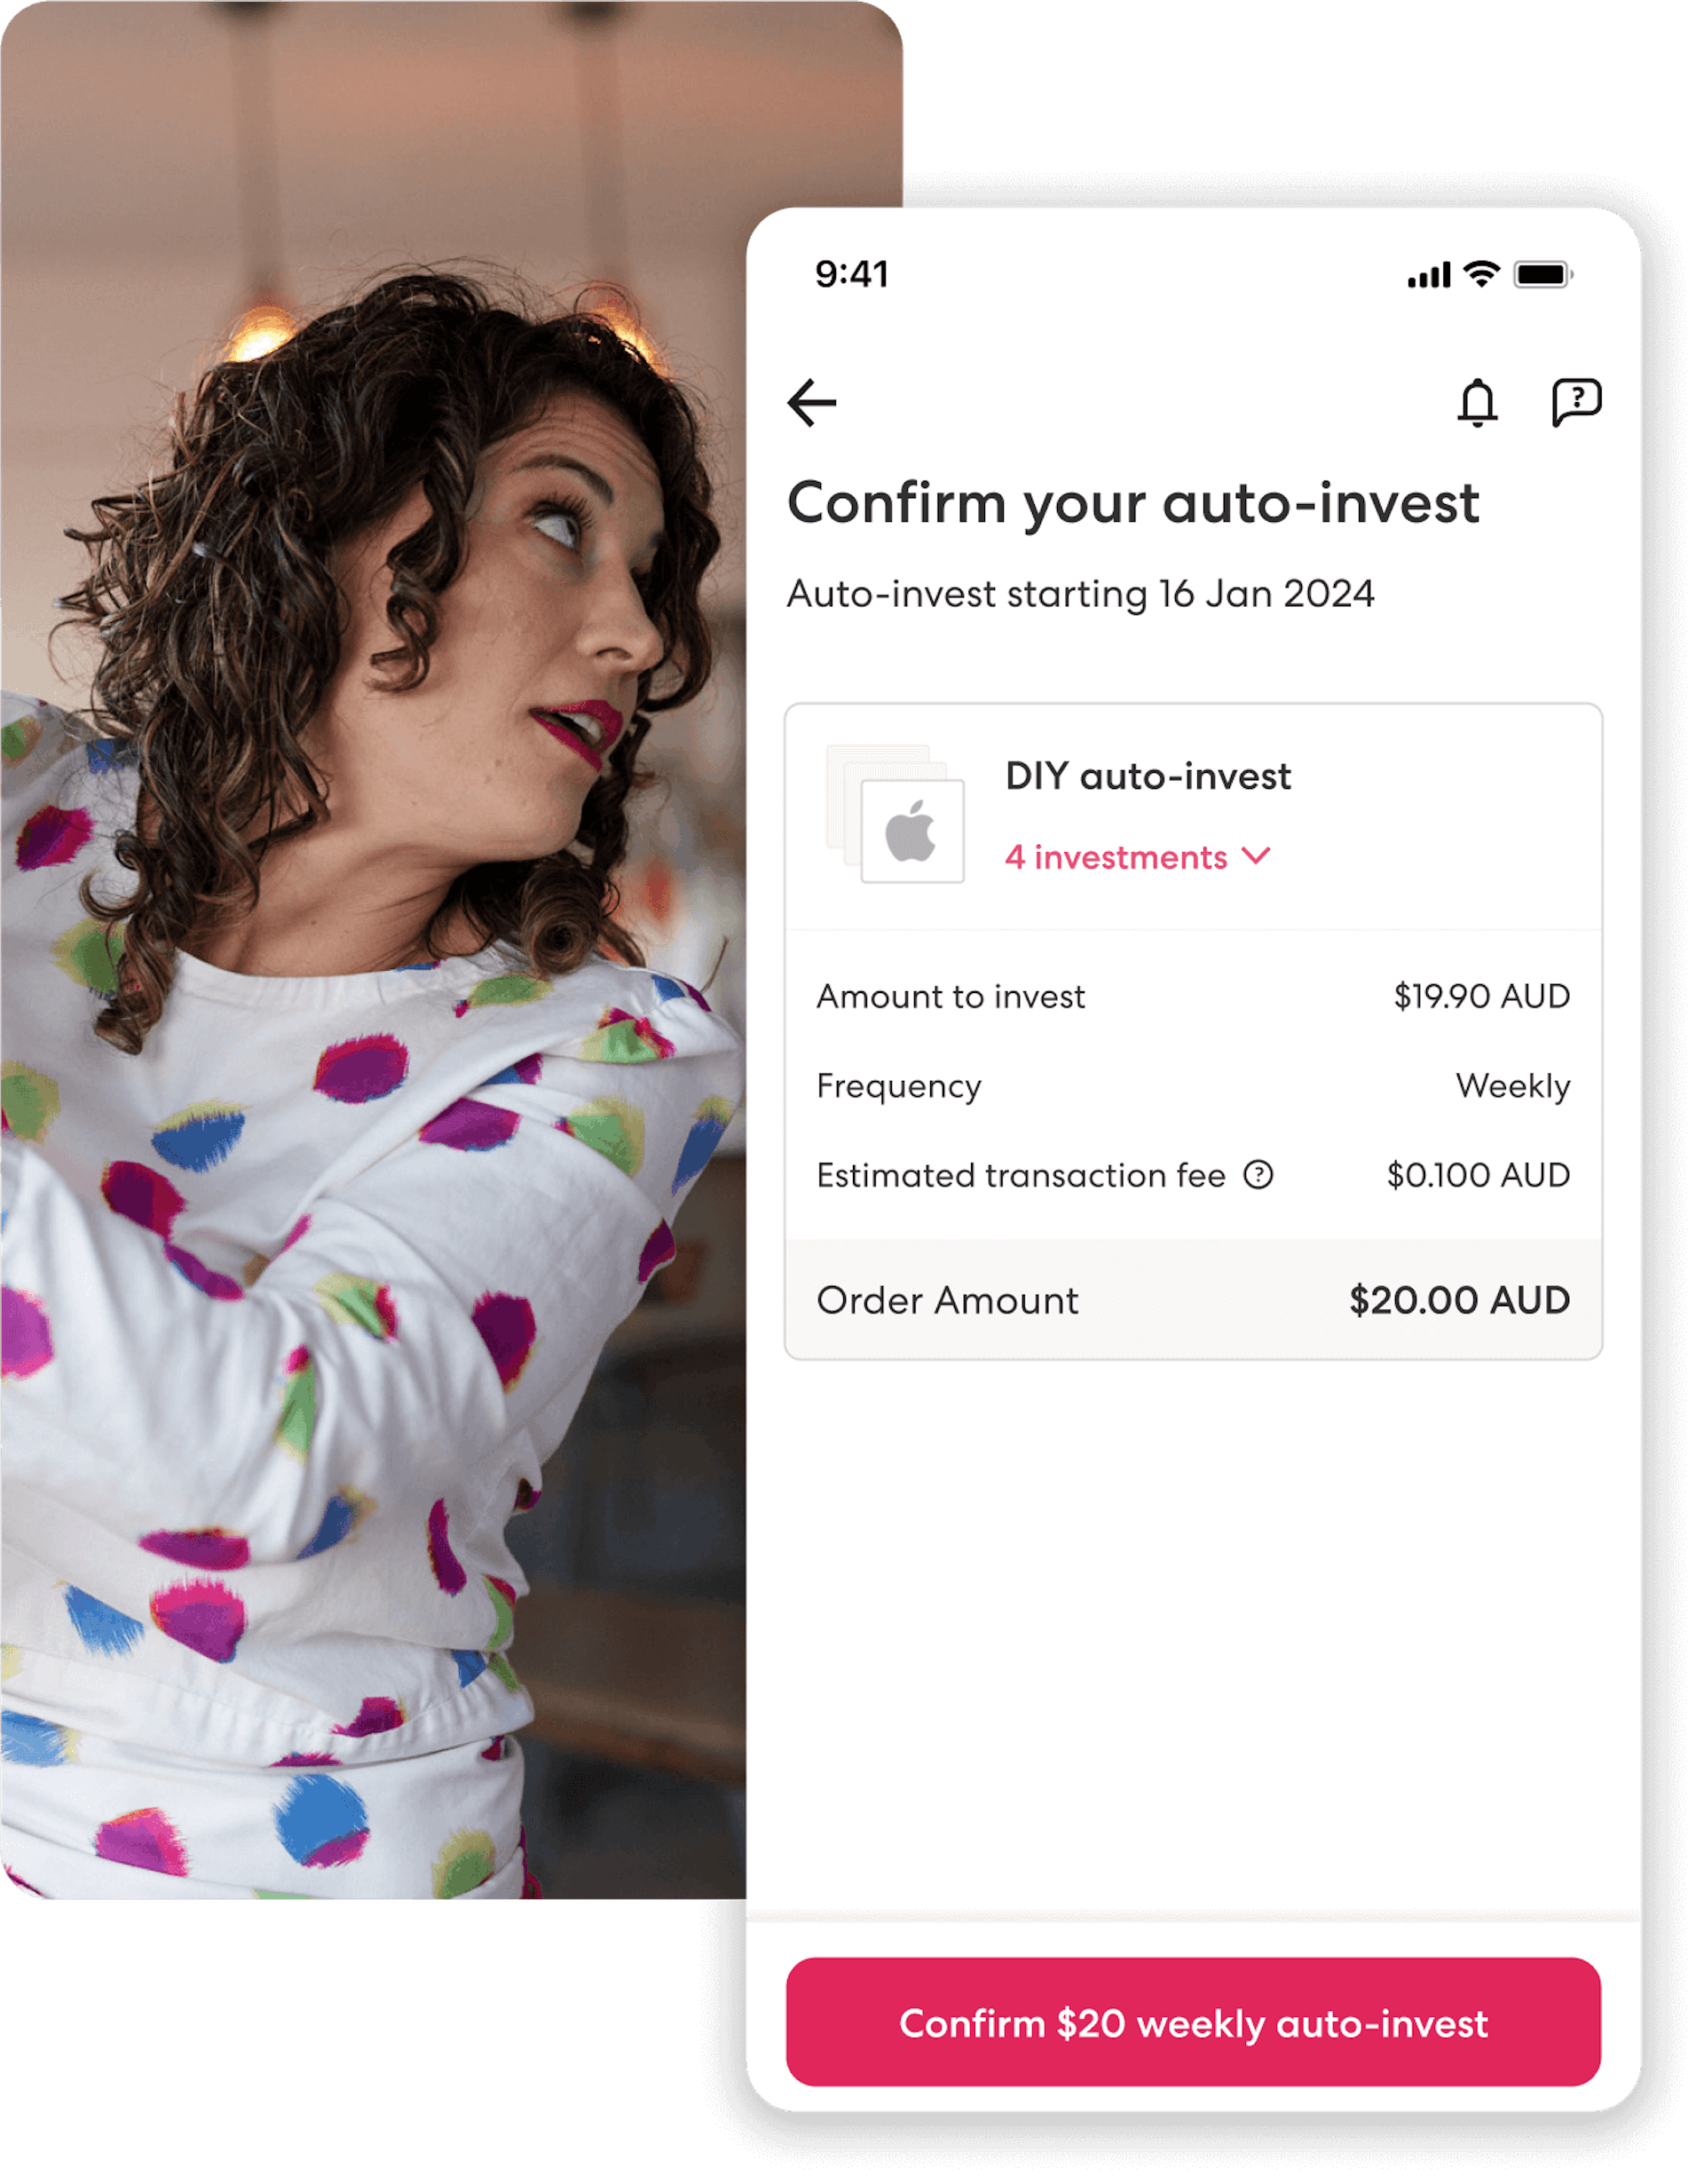 In the background, a woman in a polka dot blouse looks over her shoulder. In the foreground, an auto-invest confirmation screen is shown in the Sharesies app.